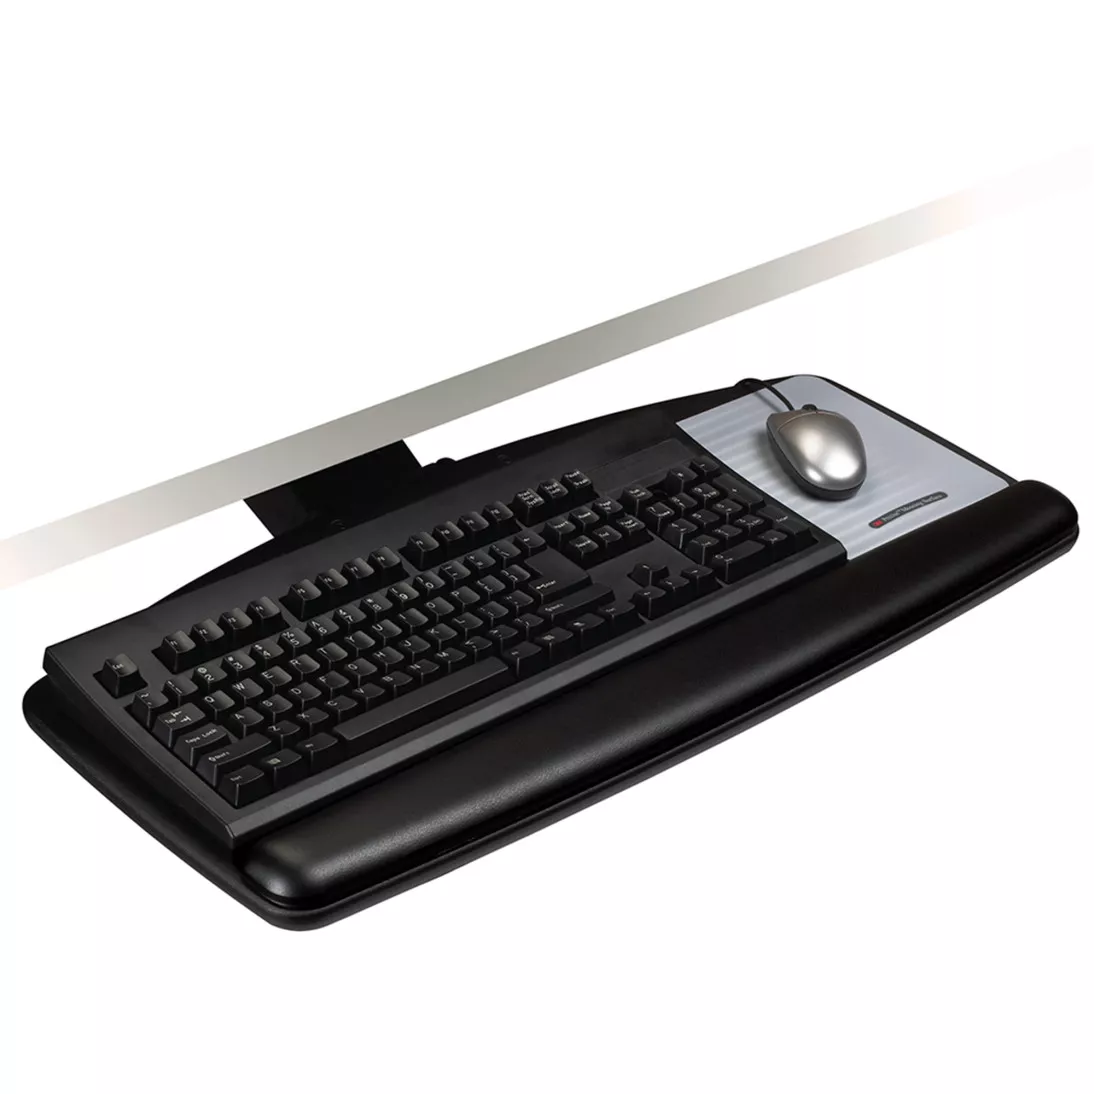 3M™ Knob Adjust Keyboard Tray with Standard Keyboard and Mouse Platform,
17 in Track, AKT60LE